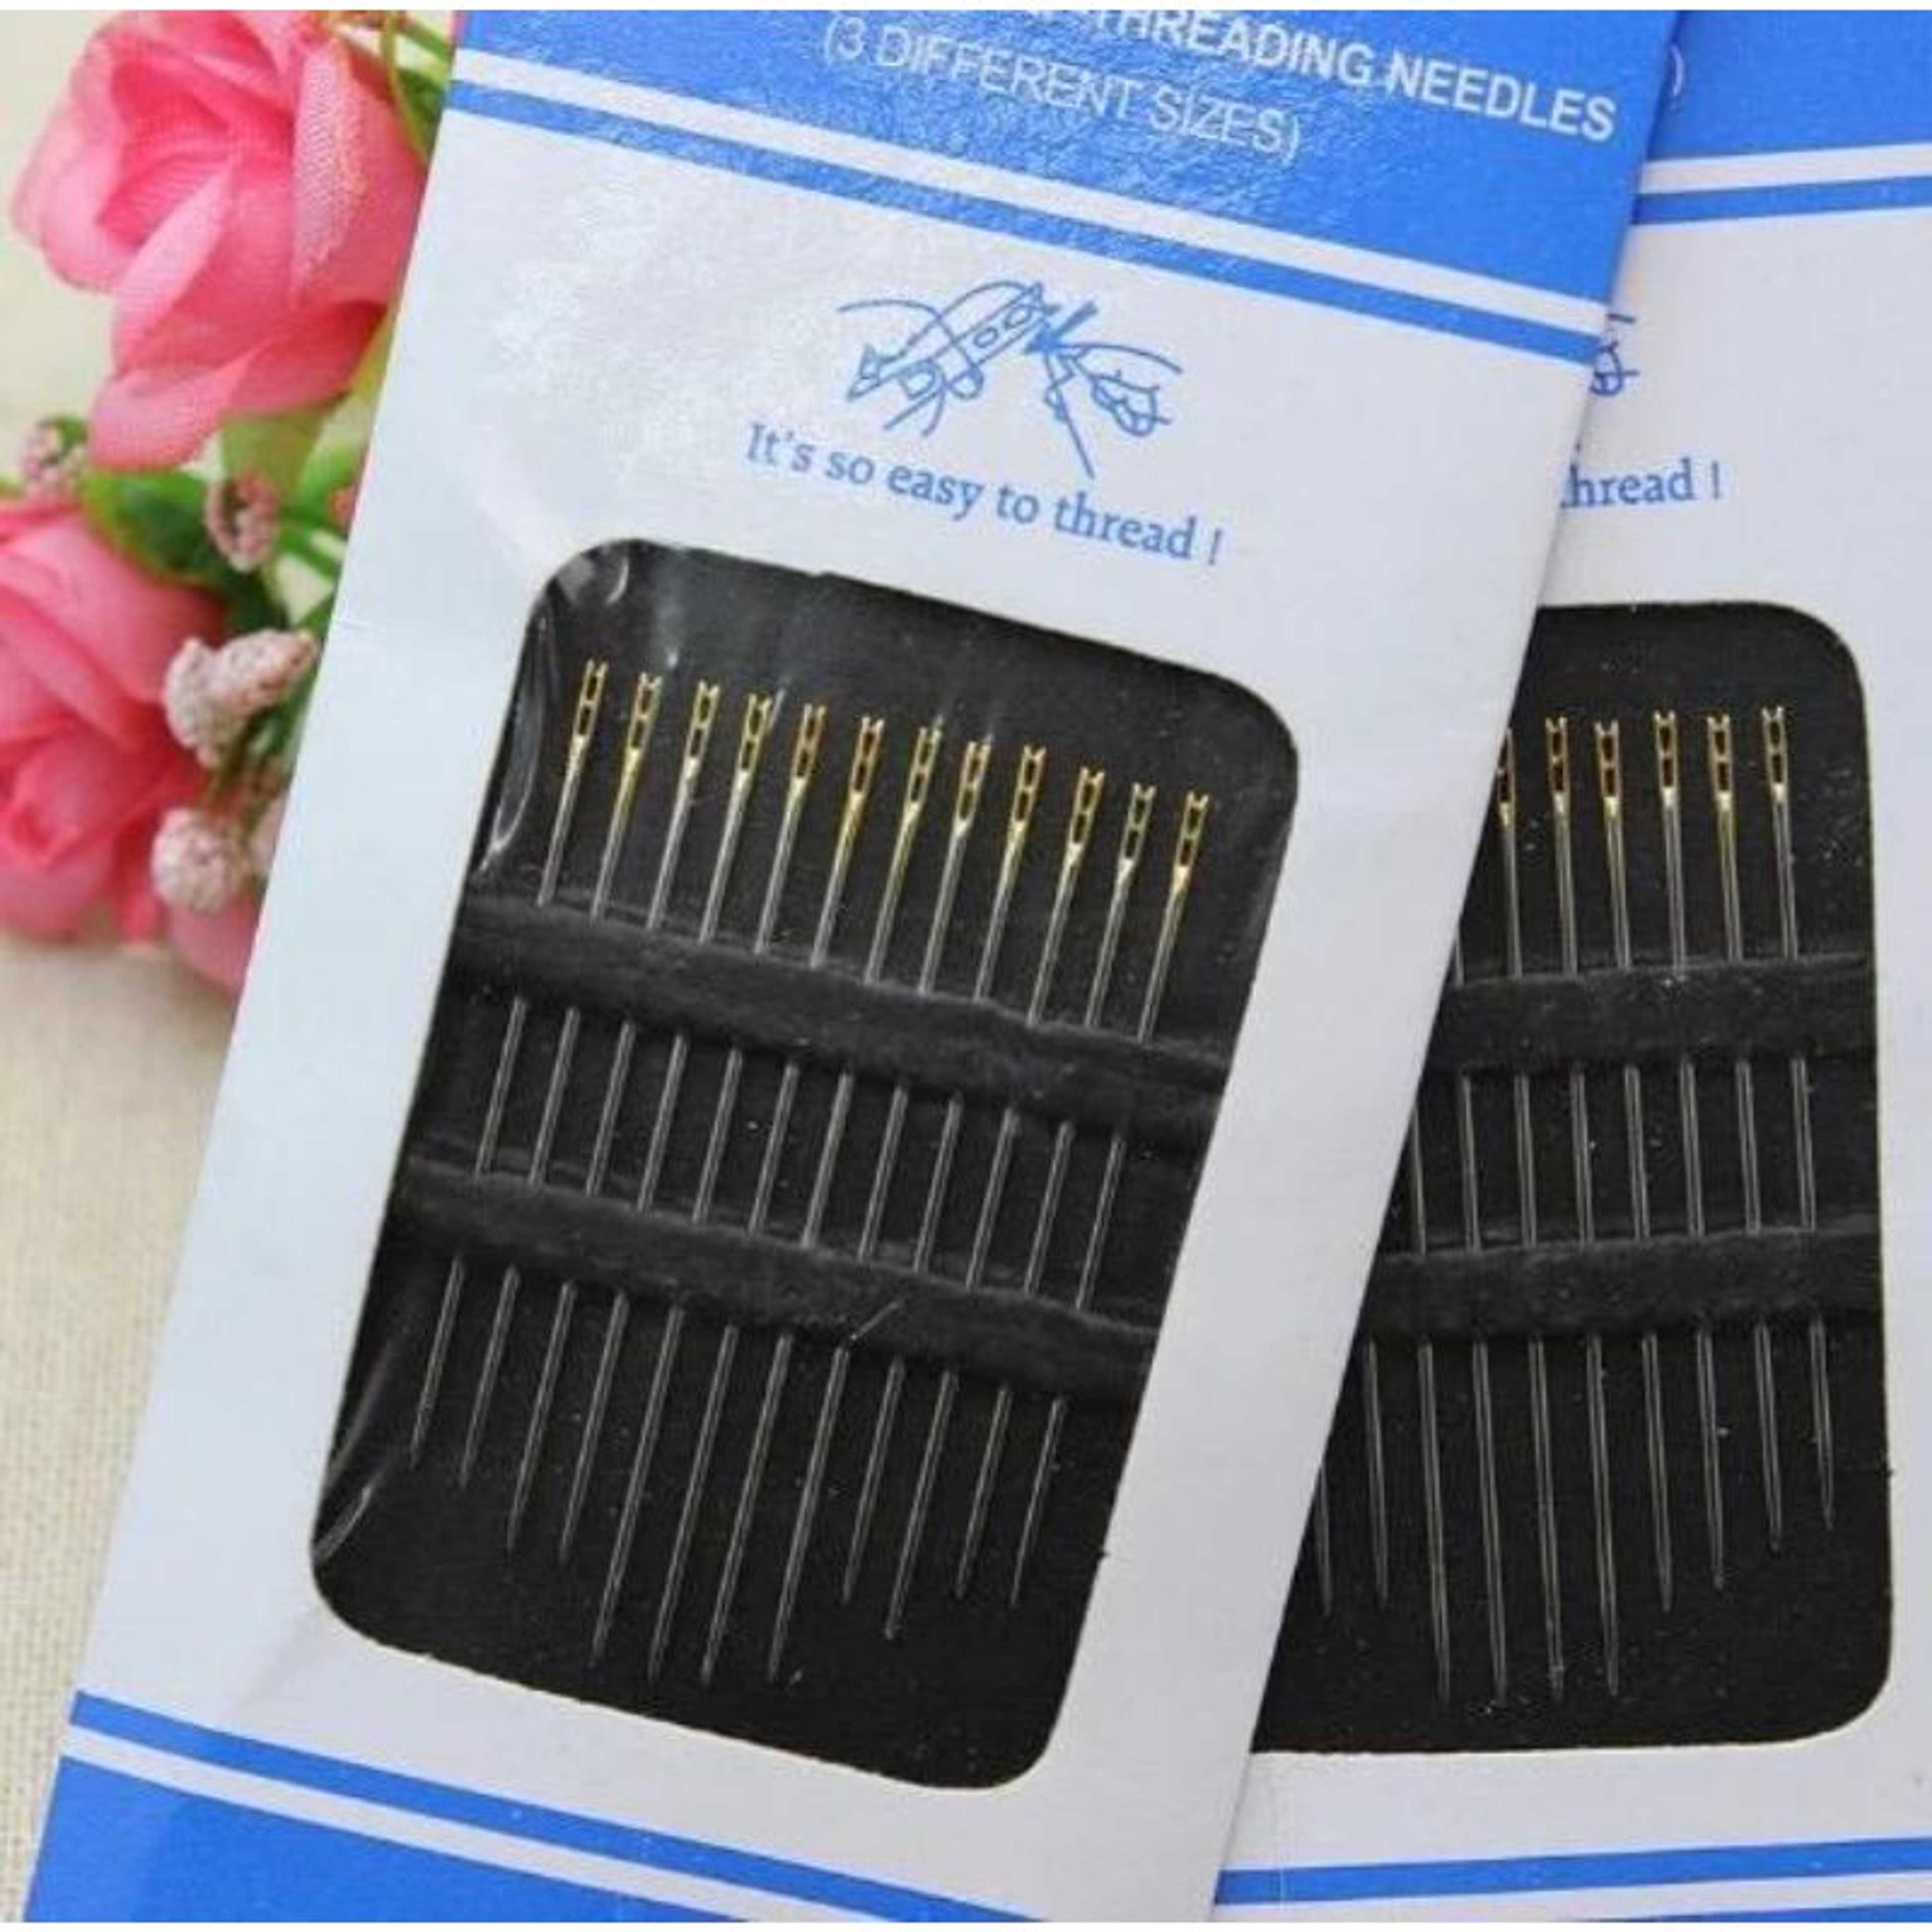 2 Packs of 12 Assorted self threading needle 3 different size perfect for quick mending-KS